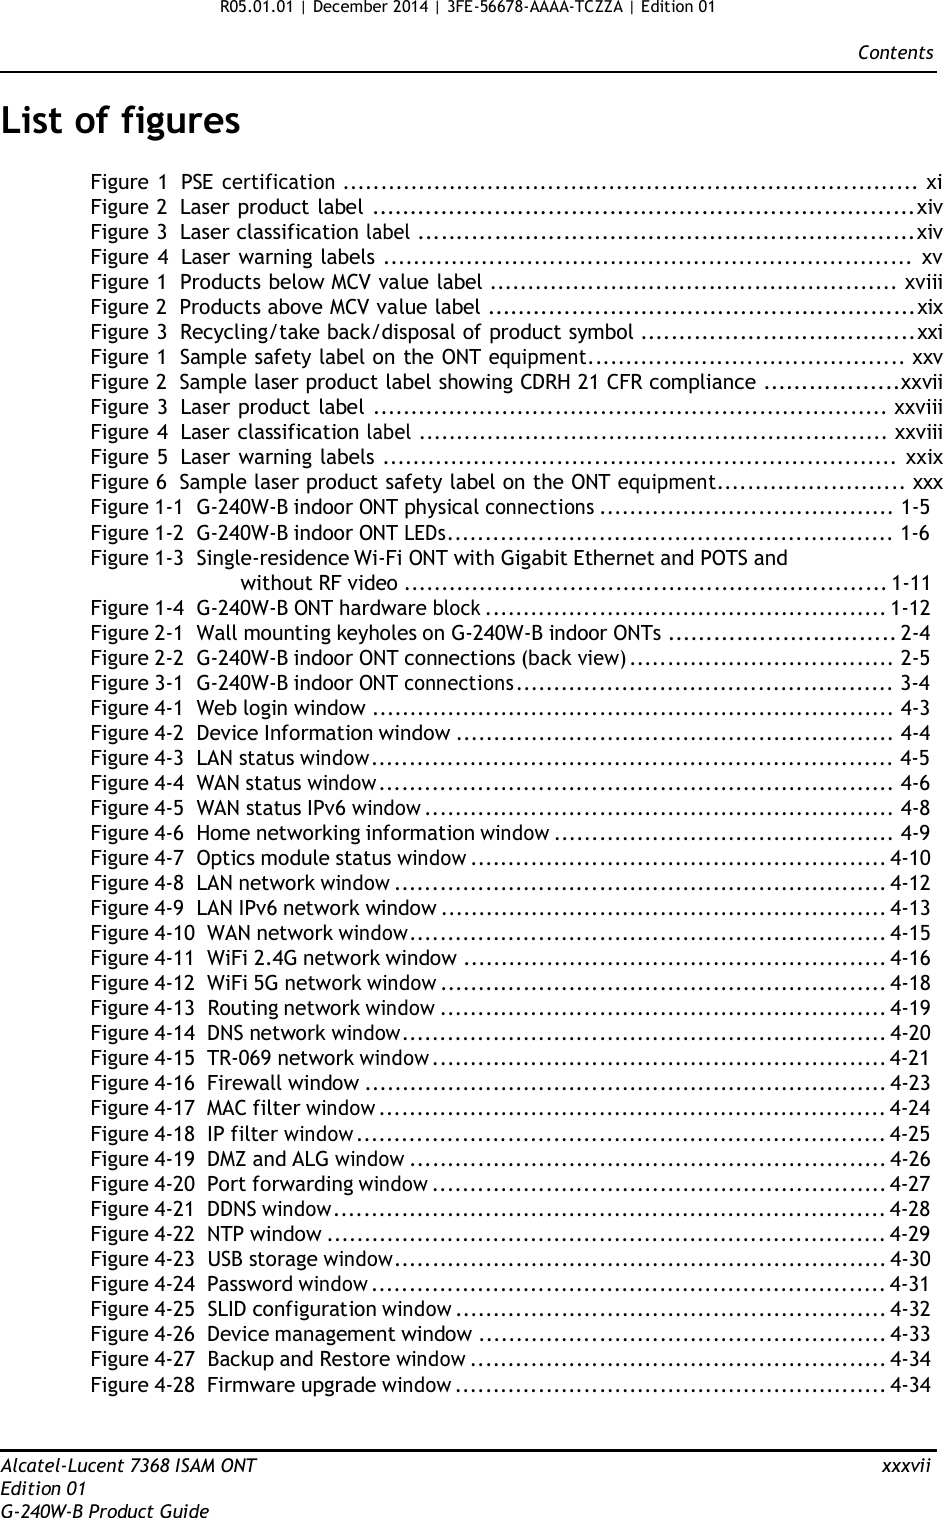 R05.01.01 | December 2014 | 3FE-56678-AAAA-TCZZA | Edition 01  Contents   List of figures  Figure 1  PSE certification ............................................................................ xi Figure 2  Laser product label .......................................................................xiv Figure 3  Laser classification label .................................................................xiv Figure 4  Laser warning labels ...................................................................... xv Figure 1  Products below MCV value label ...................................................... xviii Figure 2  Products above MCV value label ........................................................xix Figure 3  Recycling/take back/disposal of product symbol ....................................xxi Figure 1  Sample safety label on the ONT equipment.......................................... xxv Figure 2  Sample laser product label showing CDRH 21 CFR compliance ..................xxvii Figure 3  Laser product label .................................................................... xxviii Figure 4  Laser classification label .............................................................. xxviii Figure 5  Laser warning labels .................................................................... xxix Figure 6  Sample laser product safety label on the ONT equipment......................... xxx Figure 1-1  G-240W-B indoor ONT physical connections ....................................... 1-5 Figure 1-2  G-240W-B indoor ONT LEDs........................................................... 1-6 Figure 1-3  Single-residence Wi-Fi ONT with Gigabit Ethernet and POTS and without RF video ................................................................ 1-11 Figure 1-4  G-240W-B ONT hardware block ..................................................... 1-12 Figure 2-1  Wall mounting keyholes on G-240W-B indoor ONTs .............................. 2-4 Figure 2-2  G-240W-B indoor ONT connections (back view) ................................... 2-5 Figure 3-1  G-240W-B indoor ONT connections .................................................. 3-4 Figure 4-1  Web login window ..................................................................... 4-3 Figure 4-2  Device Information window .......................................................... 4-4 Figure 4-3  LAN status window..................................................................... 4-5 Figure 4-4  WAN status window .................................................................... 4-6 Figure 4-5  WAN status IPv6 window .............................................................. 4-8 Figure 4-6  Home networking information window ............................................. 4-9 Figure 4-7  Optics module status window ....................................................... 4-10 Figure 4-8  LAN network window ................................................................. 4-12 Figure 4-9  LAN IPv6 network window ........................................................... 4-13 Figure 4-10  WAN network window............................................................... 4-15 Figure 4-11  WiFi 2.4G network window ........................................................ 4-16 Figure 4-12  WiFi 5G network window ........................................................... 4-18 Figure 4-13  Routing network window ........................................................... 4-19 Figure 4-14  DNS network window................................................................ 4-20 Figure 4-15  TR-069 network window ............................................................ 4-21 Figure 4-16  Firewall window ..................................................................... 4-23 Figure 4-17  MAC filter window ................................................................... 4-24 Figure 4-18  IP filter window ...................................................................... 4-25 Figure 4-19  DMZ and ALG window ............................................................... 4-26 Figure 4-20  Port forwarding window ............................................................ 4-27 Figure 4-21  DDNS window......................................................................... 4-28 Figure 4-22  NTP window .......................................................................... 4-29 Figure 4-23  USB storage window................................................................. 4-30 Figure 4-24  Password window .................................................................... 4-31 Figure 4-25  SLID configuration window ......................................................... 4-32 Figure 4-26  Device management window ...................................................... 4-33 Figure 4-27  Backup and Restore window ....................................................... 4-34 Figure 4-28  Firmware upgrade window ......................................................... 4-34    Alcatel-Lucent 7368 ISAM ONT  xxxvii Edition 01 G-240W-B Product Guide 